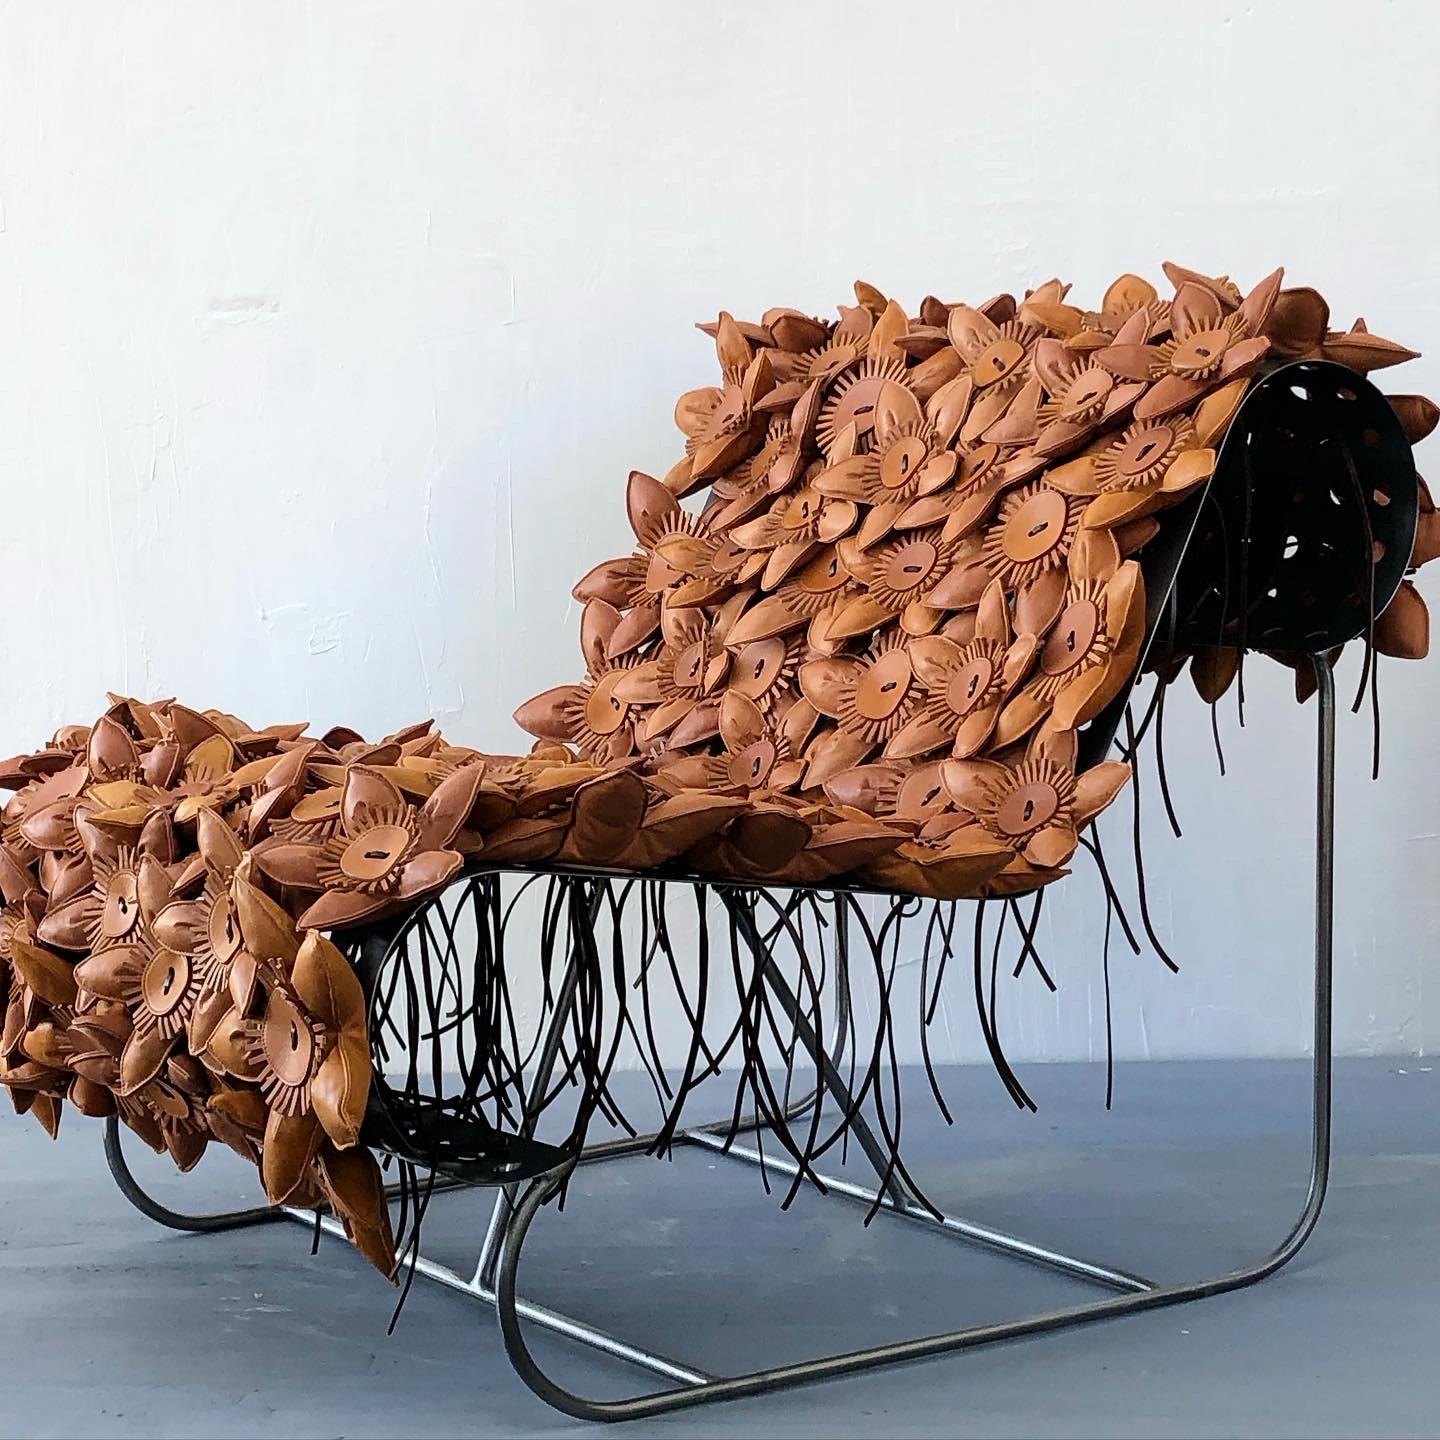 To be seated within a bouquet of blooming passion flowers, immersed in petals. Constructed from a bent perforated industrial plate structure, to which soft leather flowers
Are hand tied and fixed by chrome rings. The seat is bouncy, and